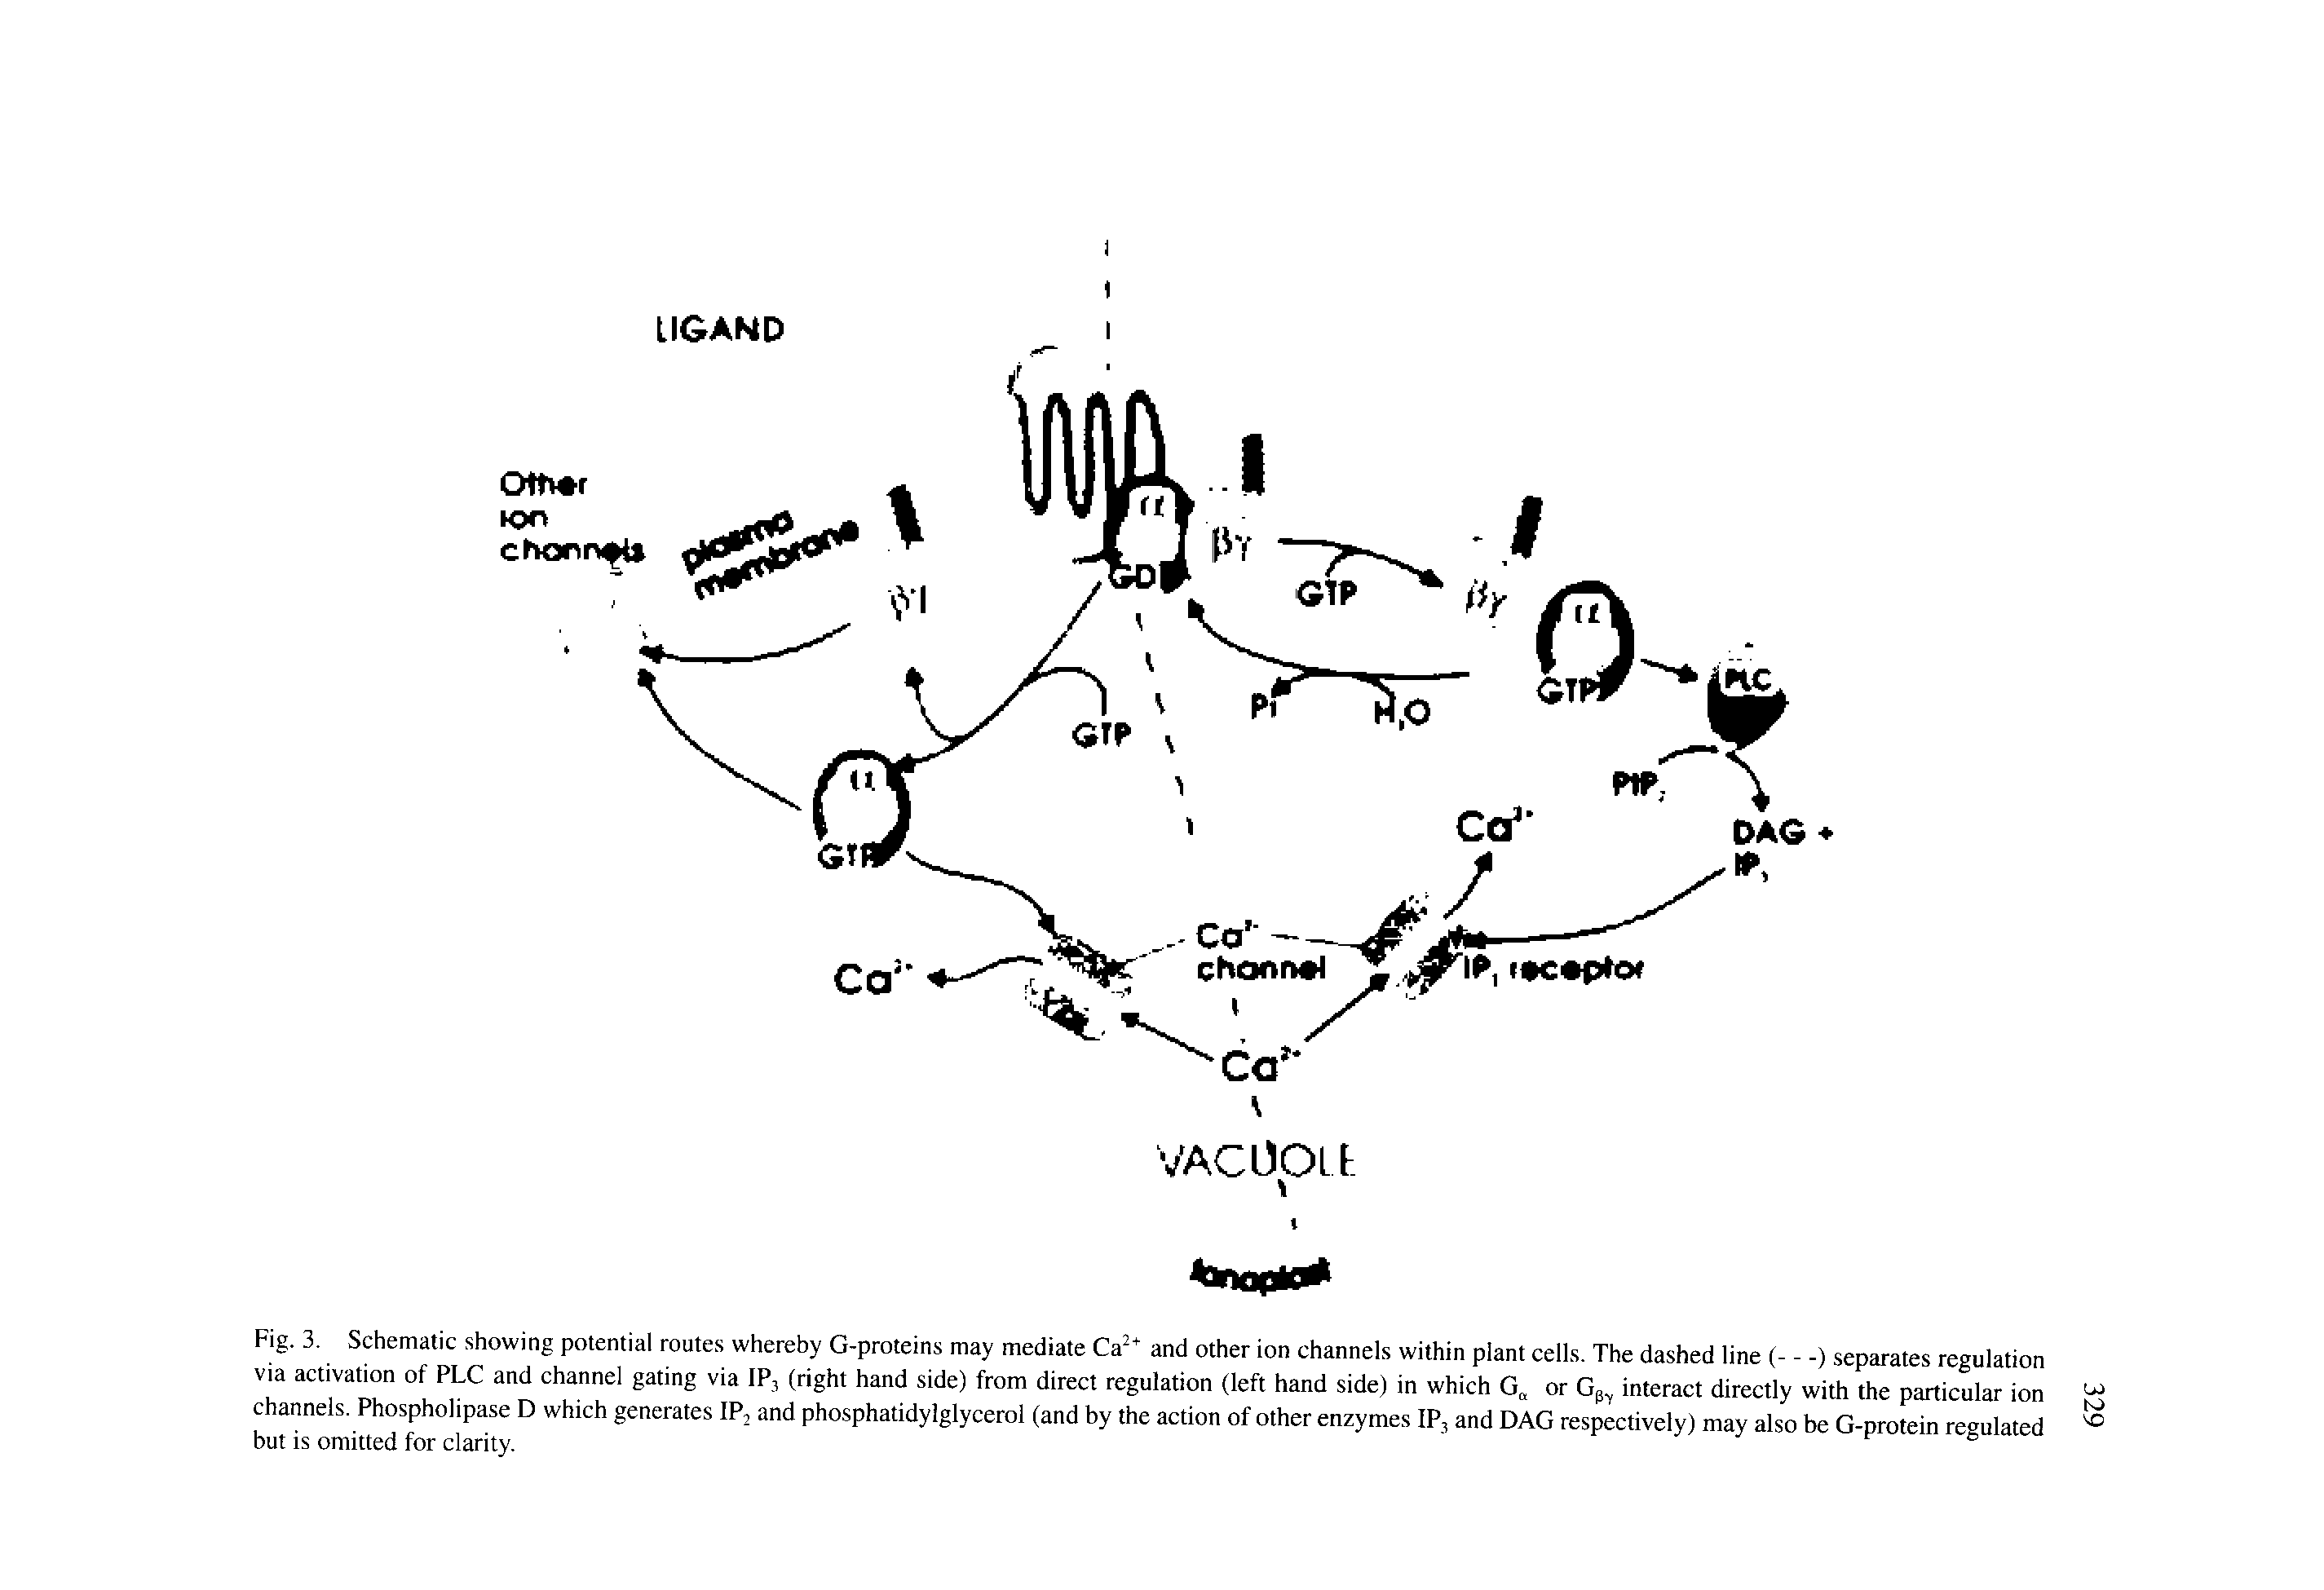 Fig. 3. Schematic showing potential routes whereby G-proteins may mediate Ca and other ion channels within plant cells. The dashed line (—) separates regulation via activation of PLC and channel gating via IP3 (right hand side) from direct regulation (left hand side) in which G or Gp interact directly with the particular ion channels. Phospholipase D which generates IP2 and phosphatidylglycerol (and by the action of other enzymes IP, and DAG respectively) may also be G-protein regulated but is omitted for clarity.